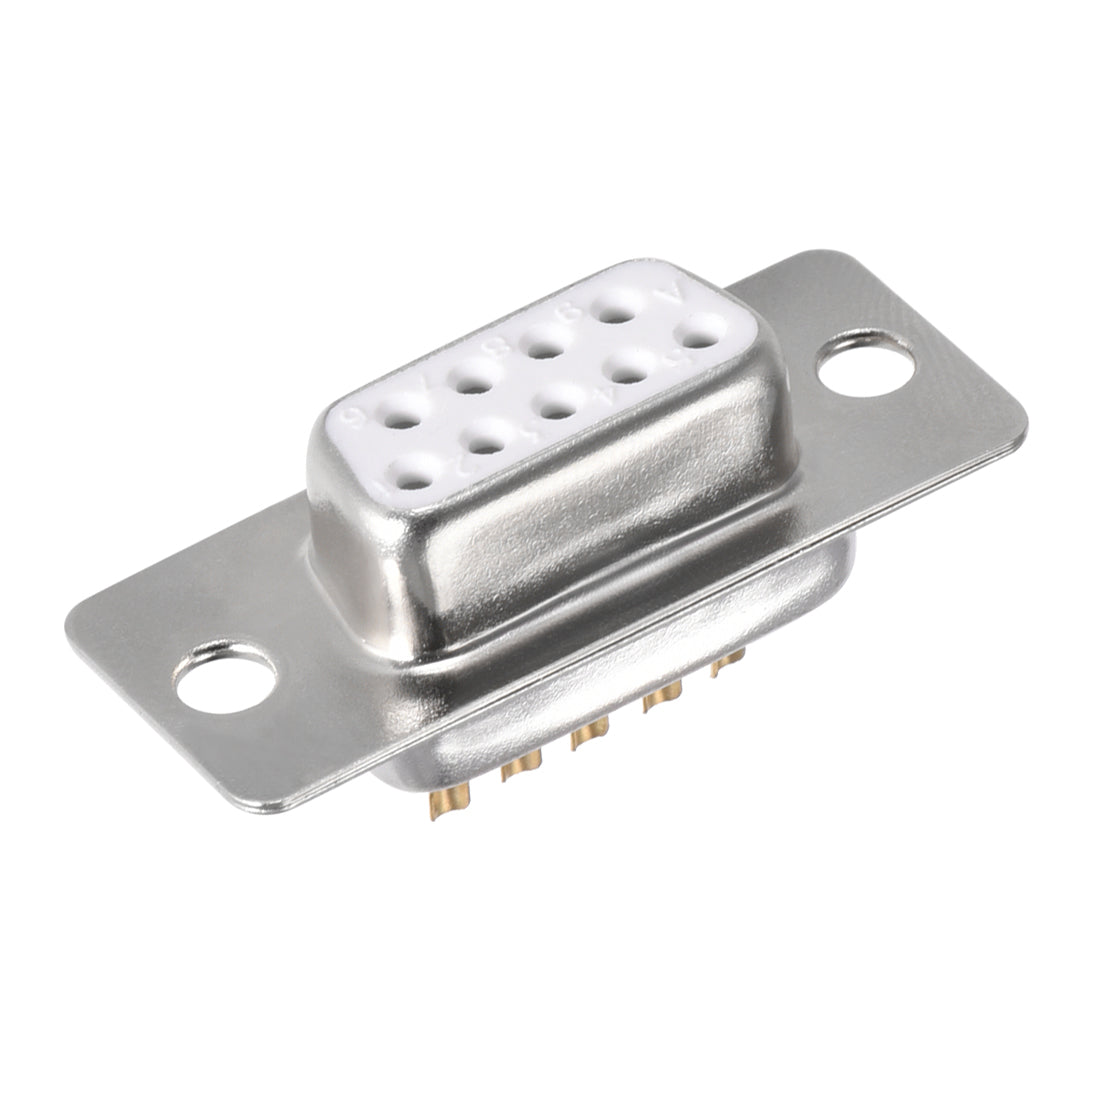 uxcell Uxcell D-sub Connector DB9 Female Socket 9-pin 2-row Port Terminal Breakout for Mechanical Equipment CNC Computers White 8pcs